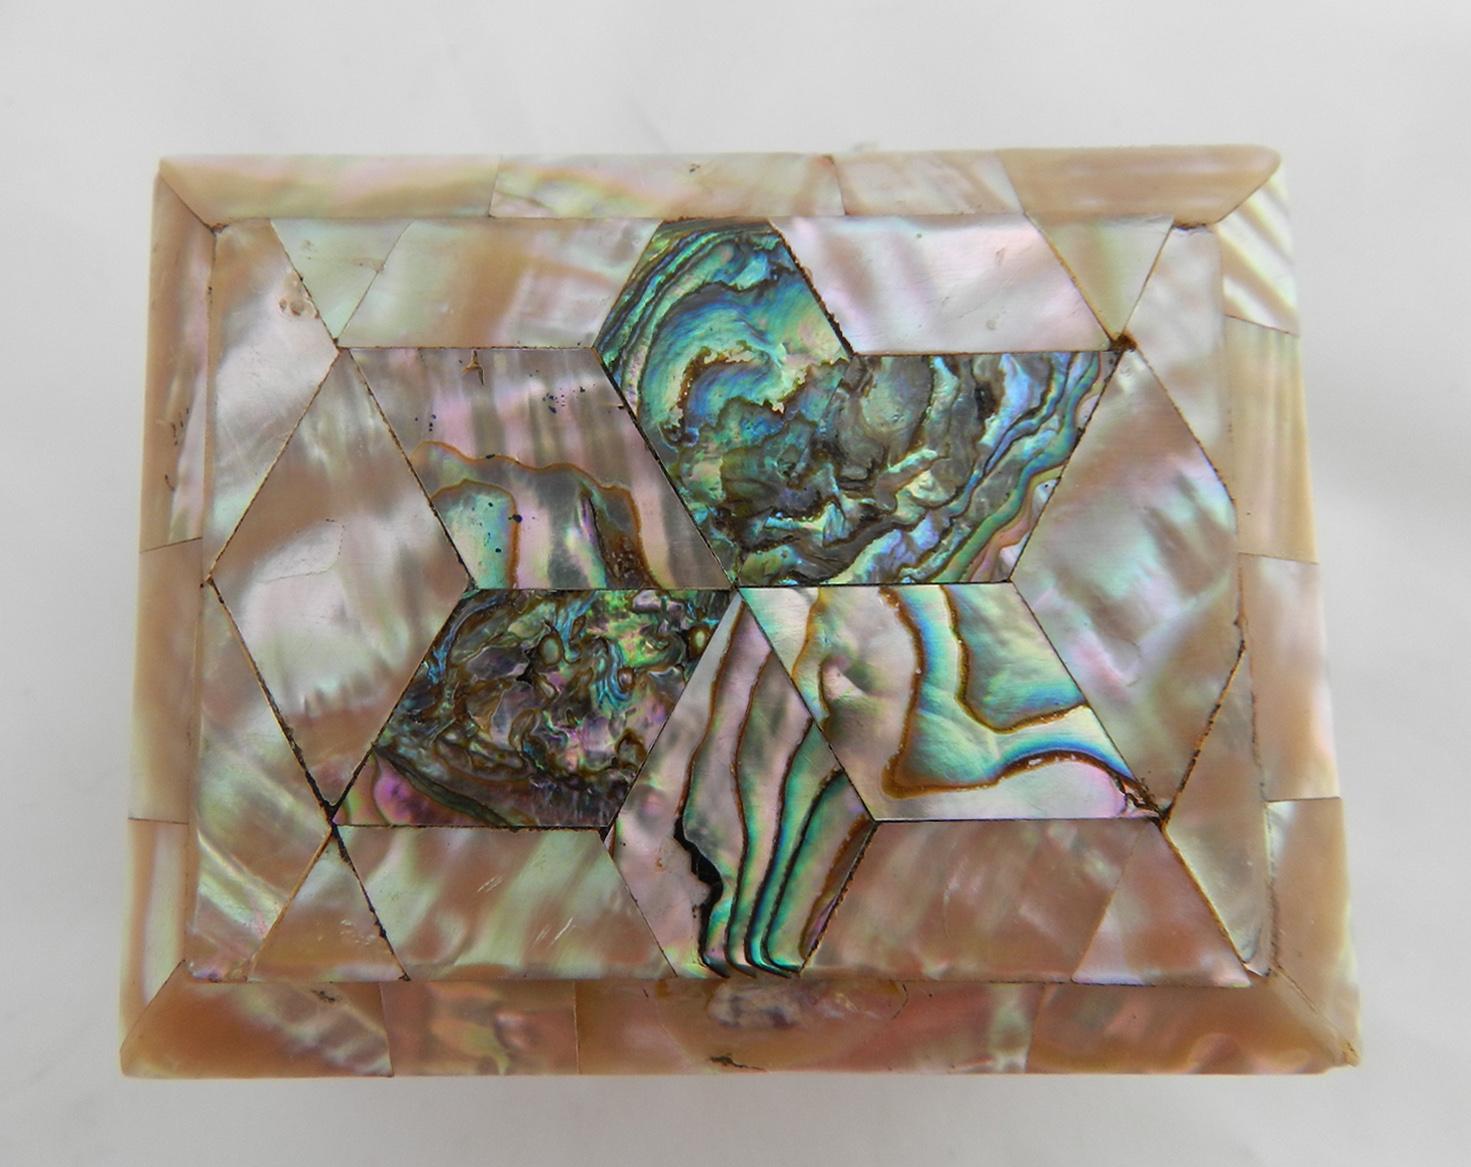 Rectangular box covered in Mother of Pearl and Abalone, circa 1900
Abalone forms a star shape on the lid
Push button to open
Stands on 4 small feet
Lined with light blue silk to the inside, the silk is lightly distressed through age and use not